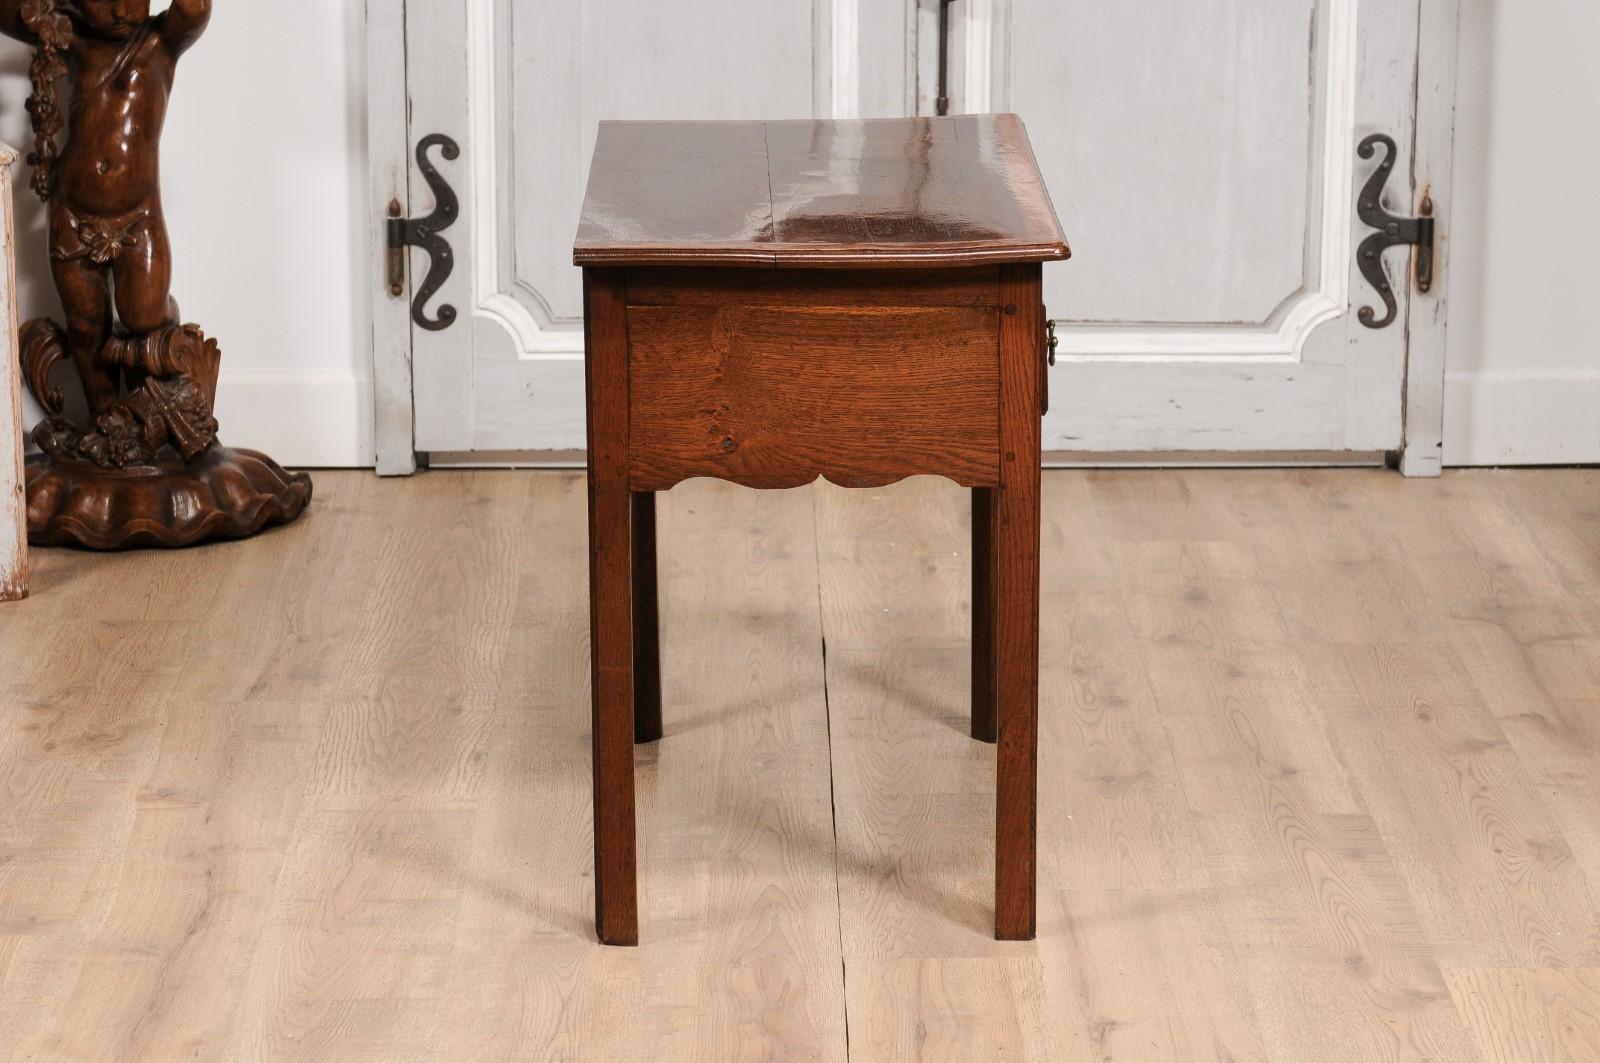 English Georgian Period 18th Century Oak Lowboy Side Table with Carved Apron For Sale 3